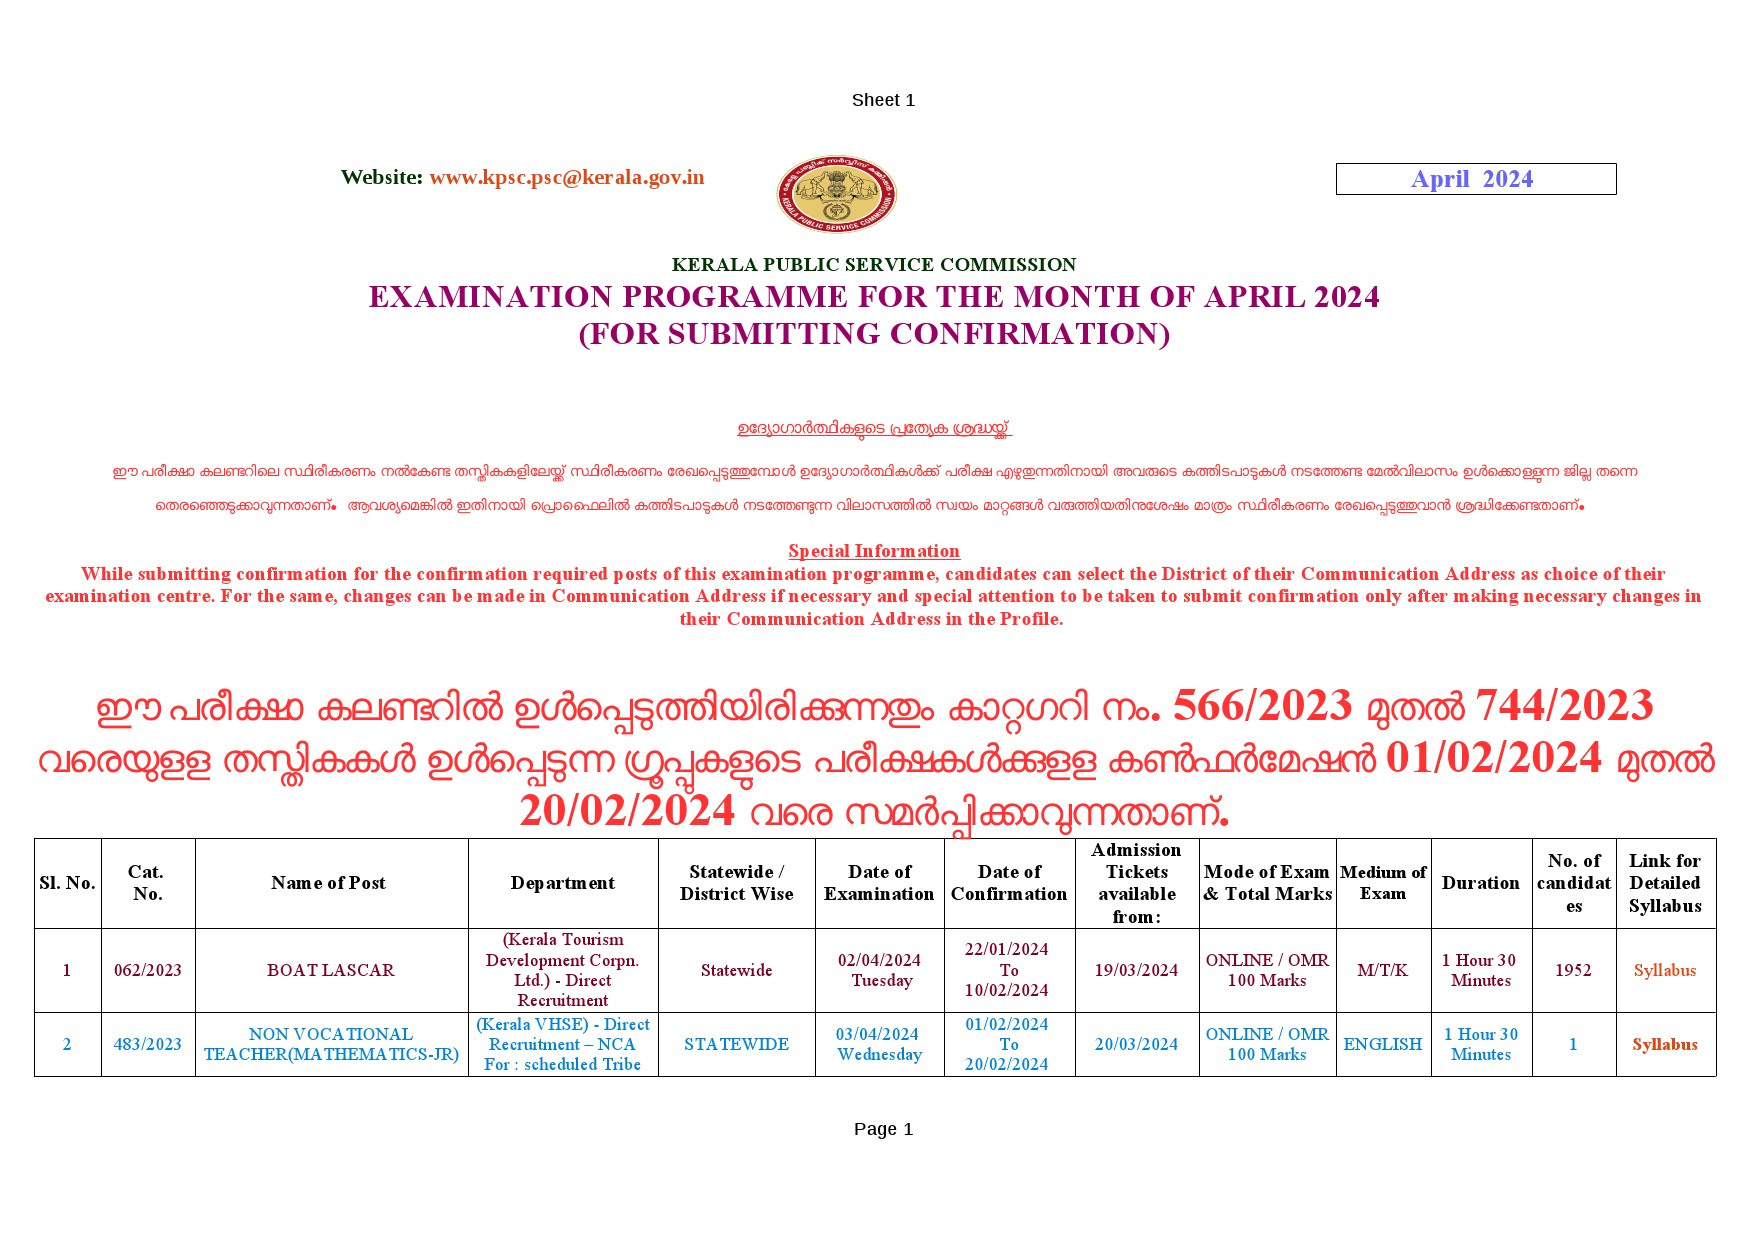 Examination Programme For The Month Of April 2024 - Notification Image 1